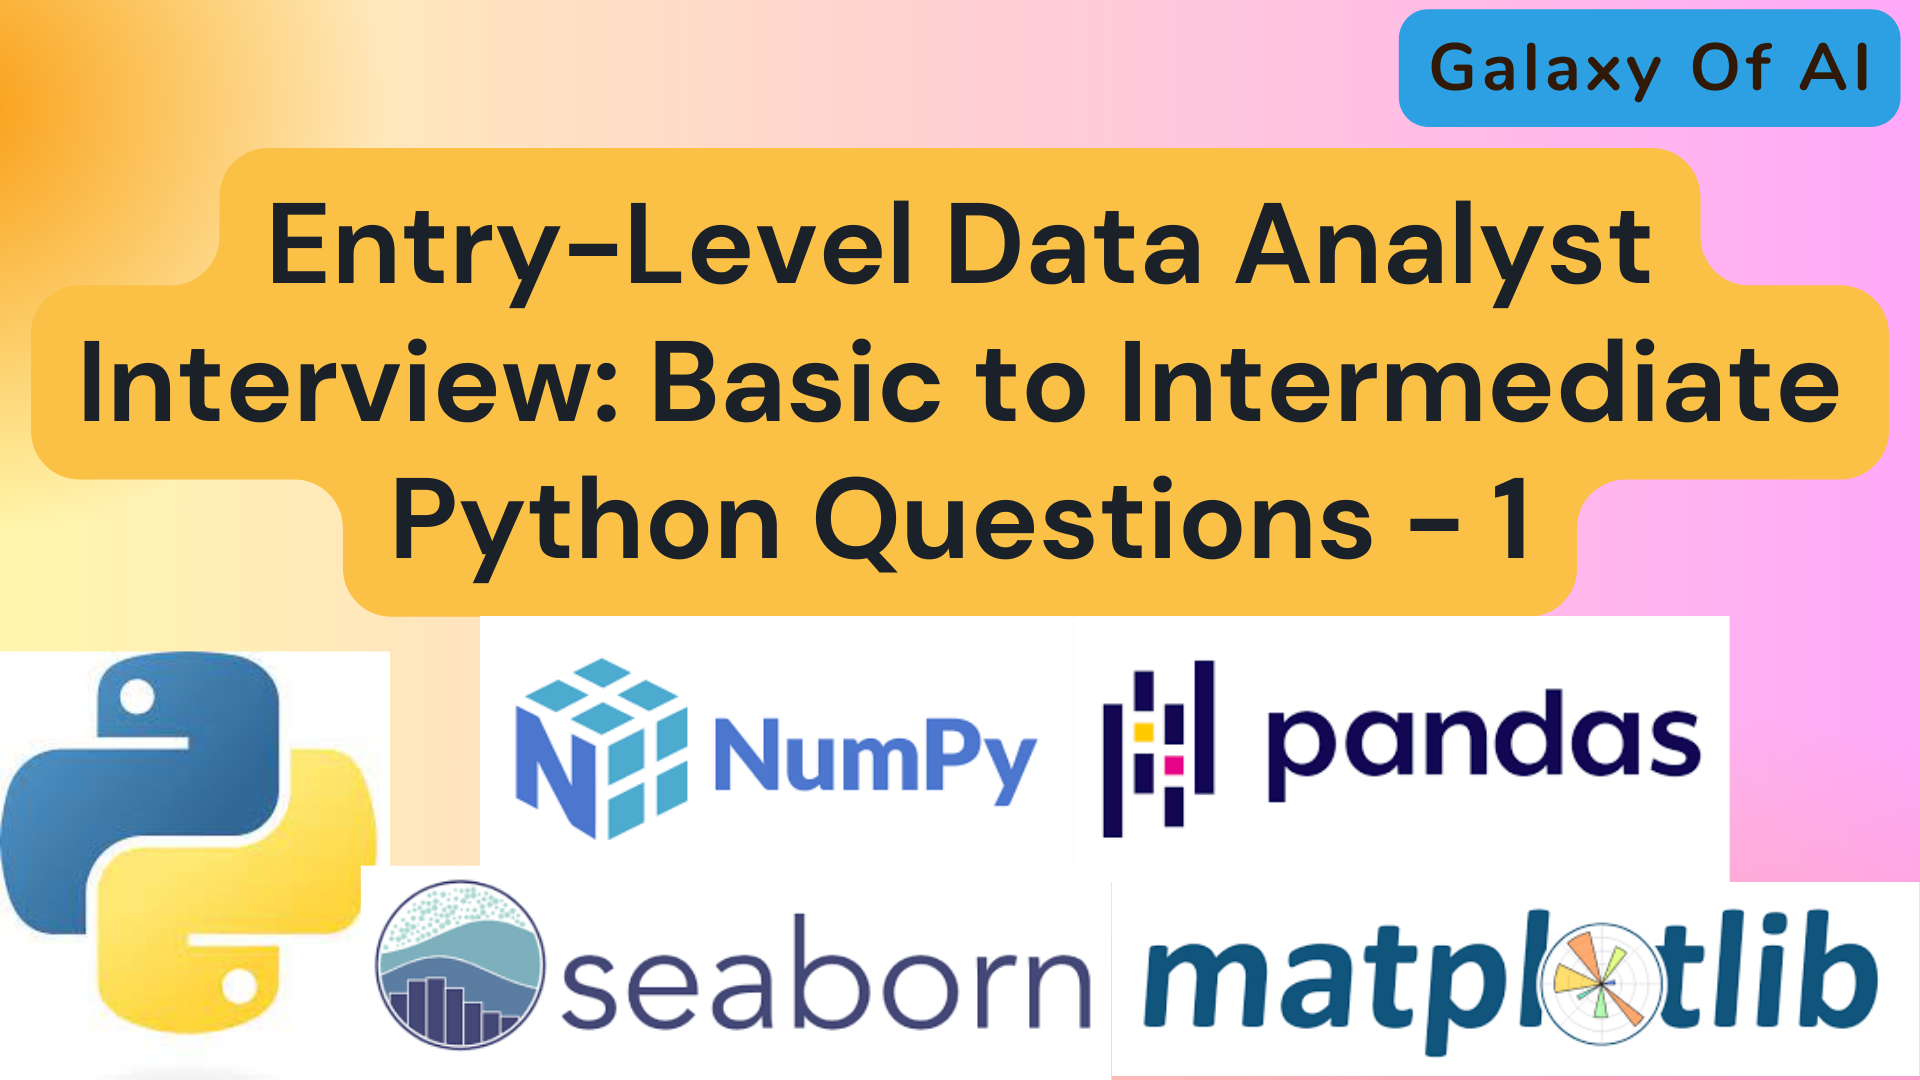 Entry-Level Data Analyst Interview: Basic to Intermediate Python Questions - 1